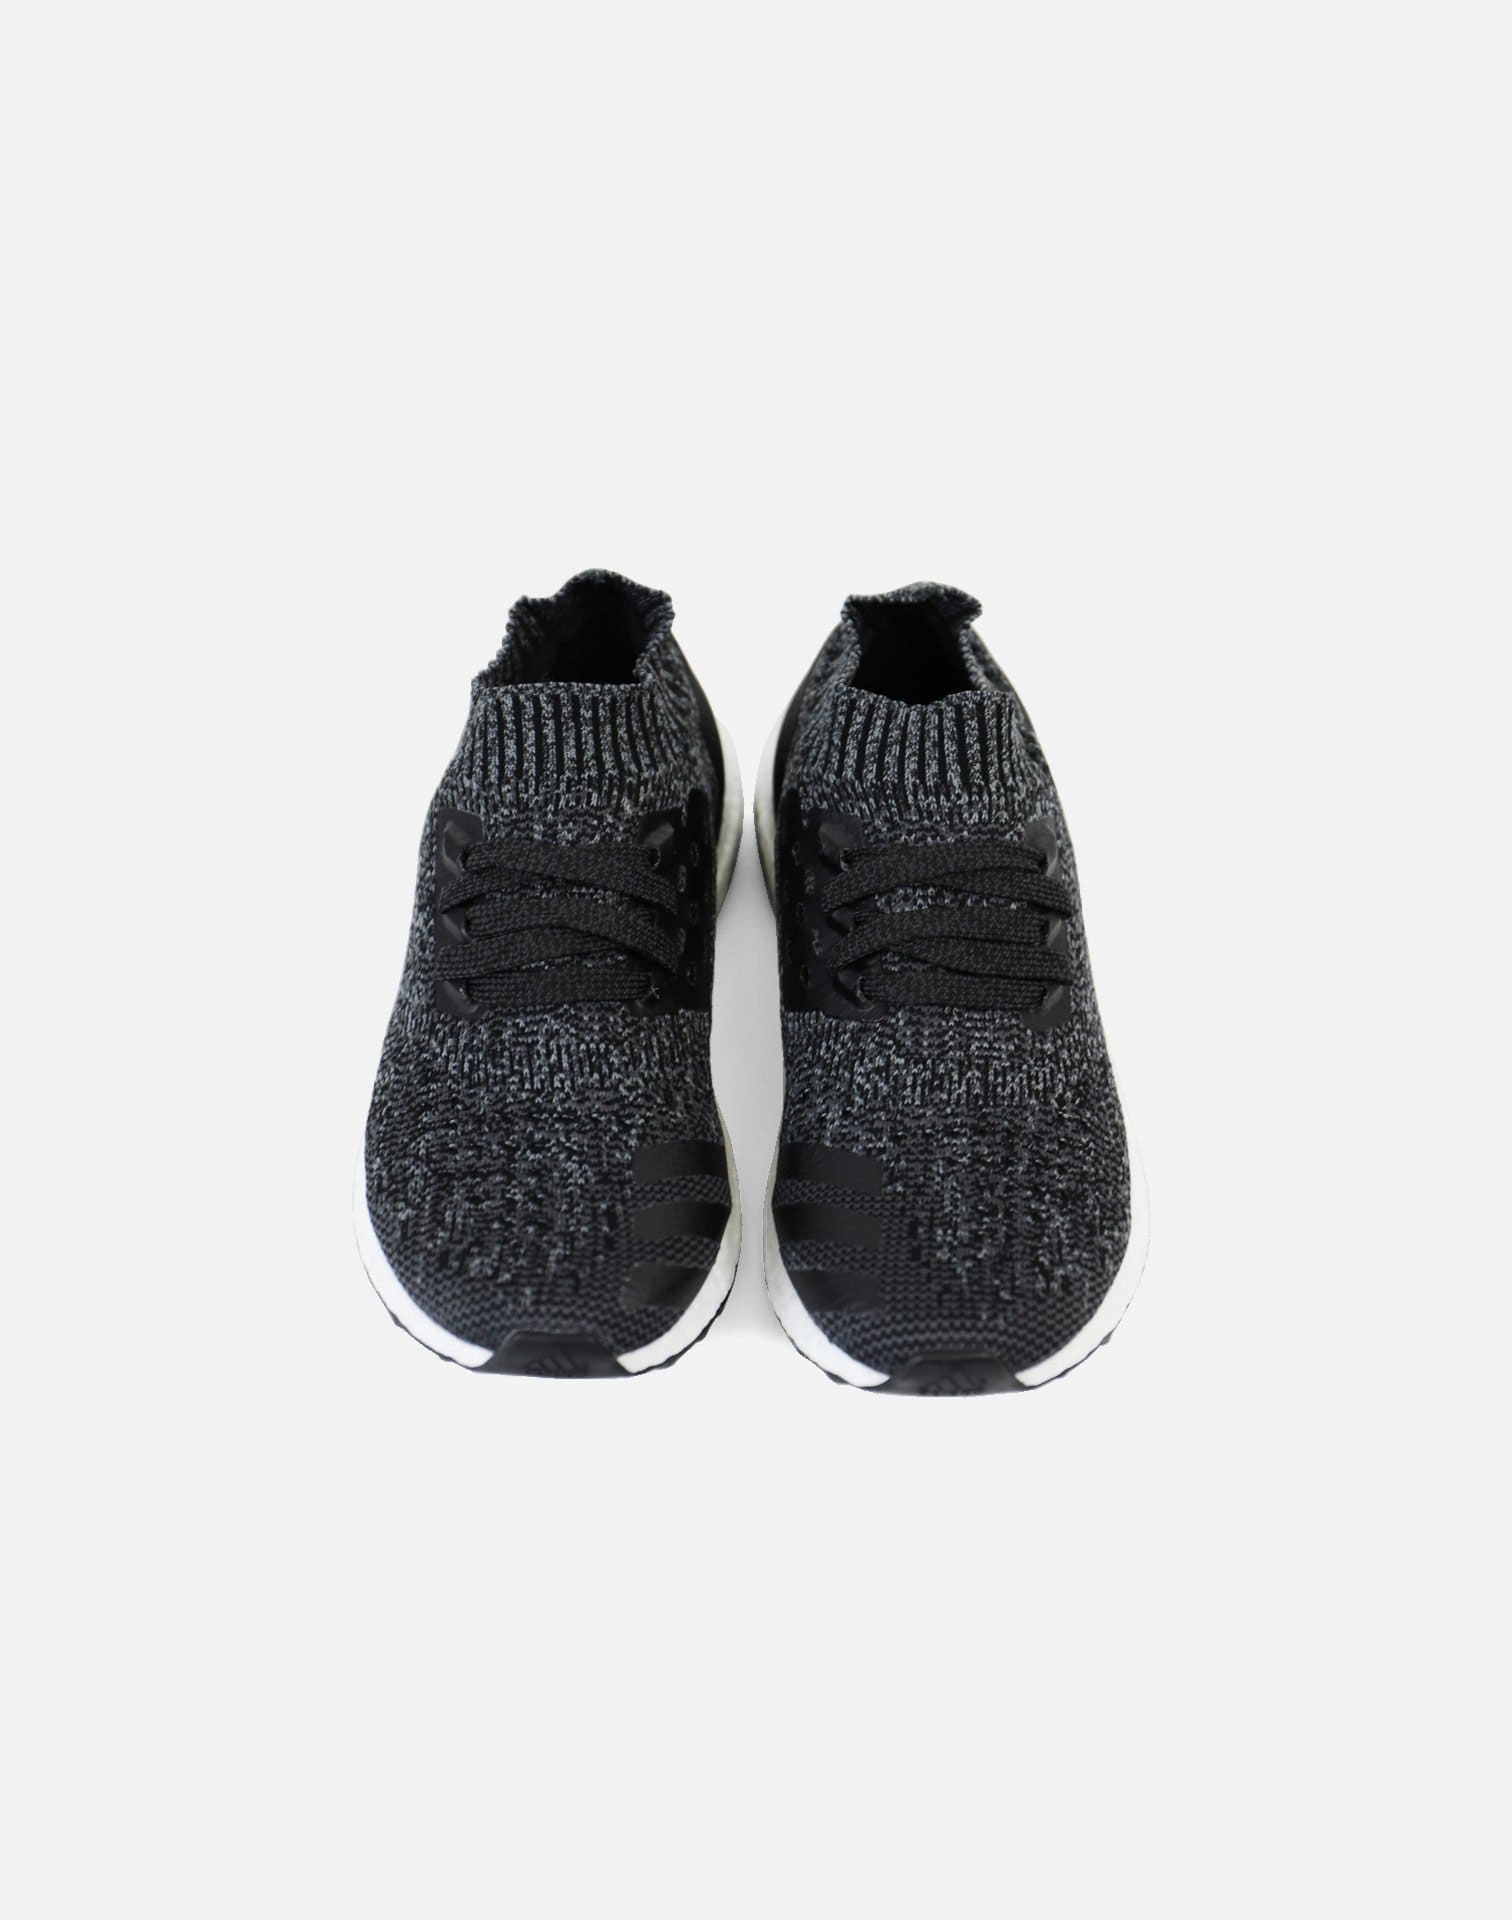 adidas Ultraboost Ungaged (Core Black/Solid Grey-White)